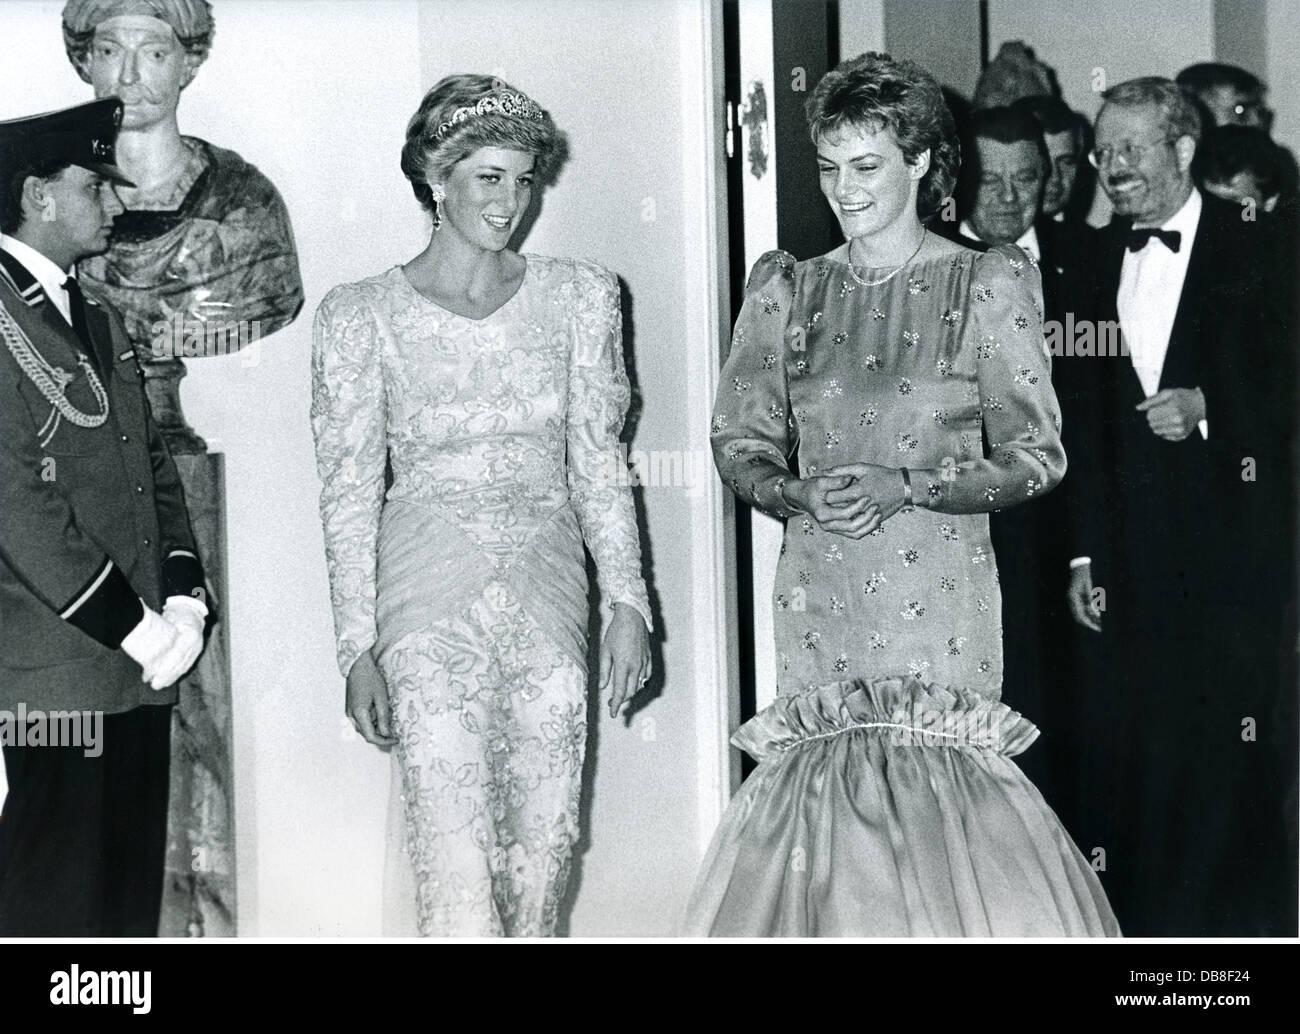 Diana, 1.7.1961 - 31.8.1997, Princess of Wales 29.7.1981 - 31.8.1997, half length, with Monica Hohlmeier, daughter of the former Bavarian Prime Minister Franz Josef Strauss (right), state visit, reception in the Munich Residence, Munich, Germany, 1987, Stock Photo